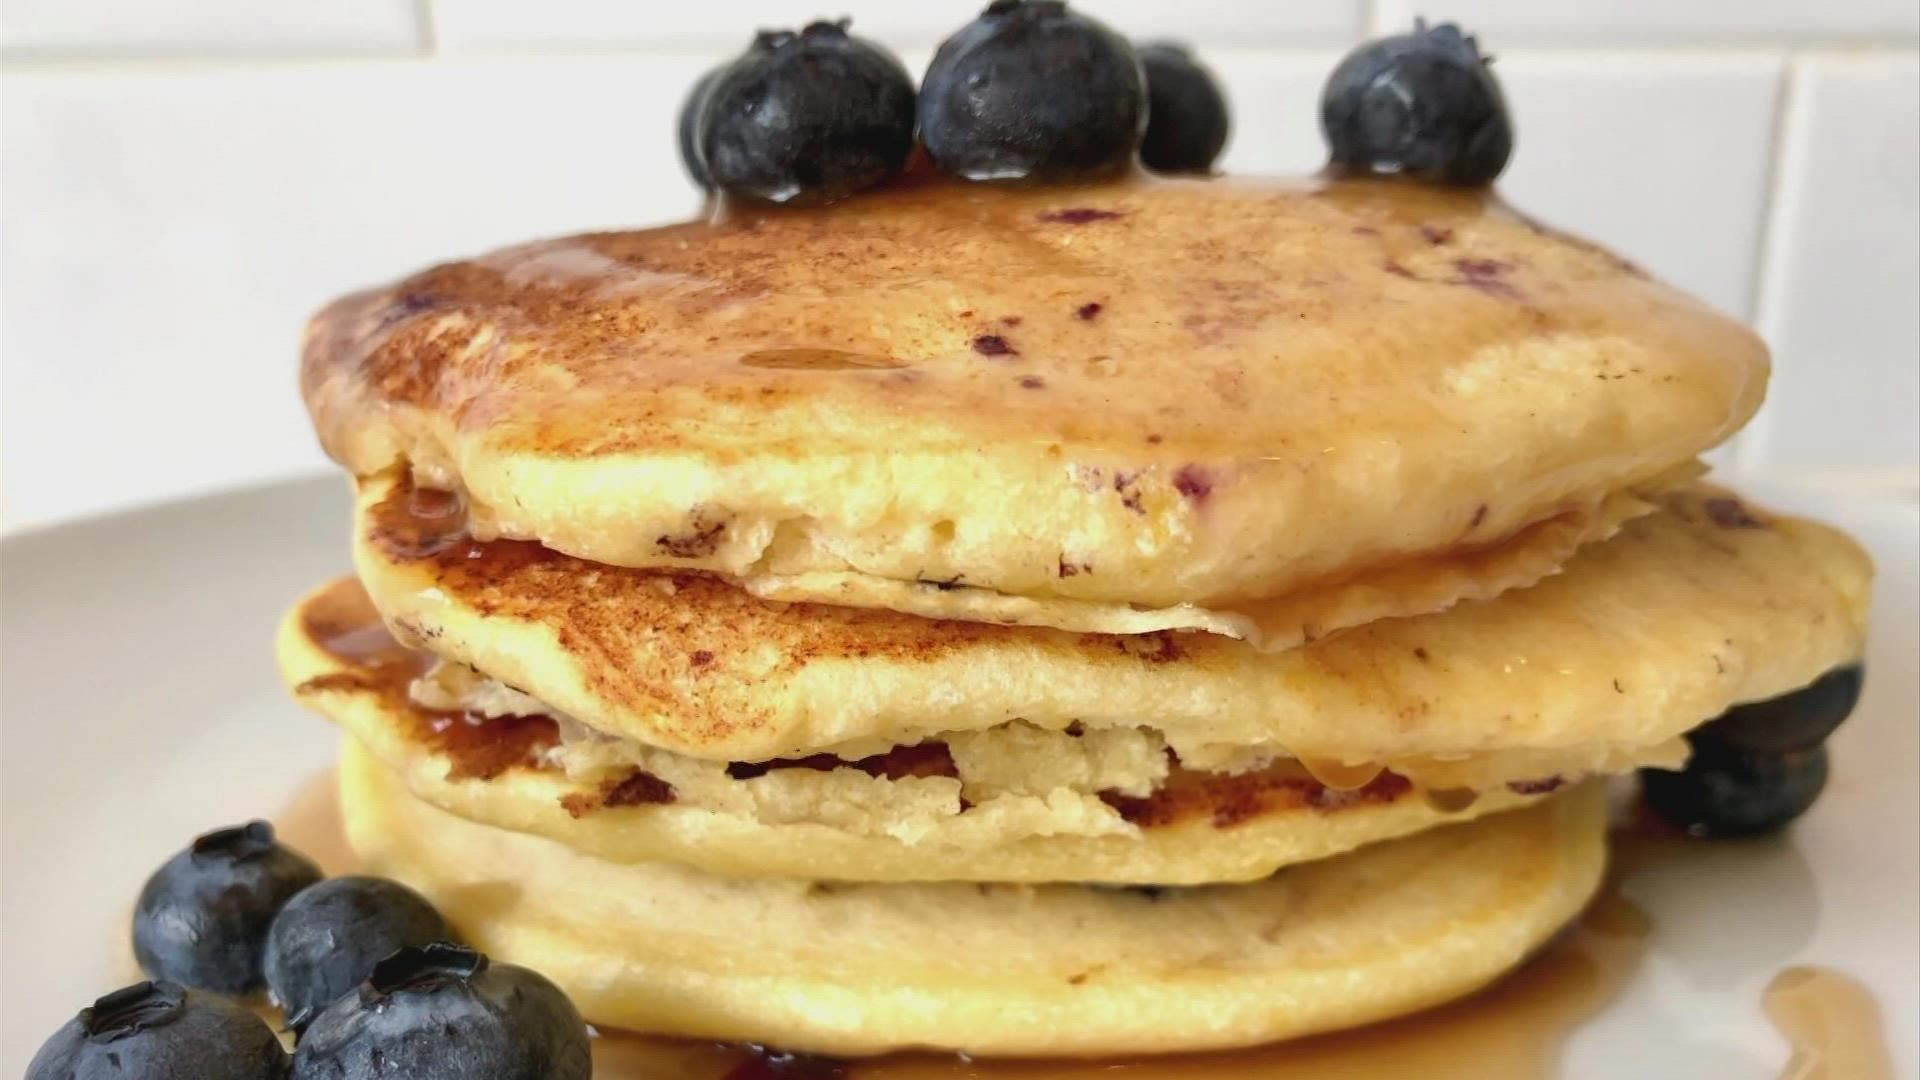 10TV's Brittany Bailey shares a delicious way to enhance the flavor in your morning stack of pancakes.